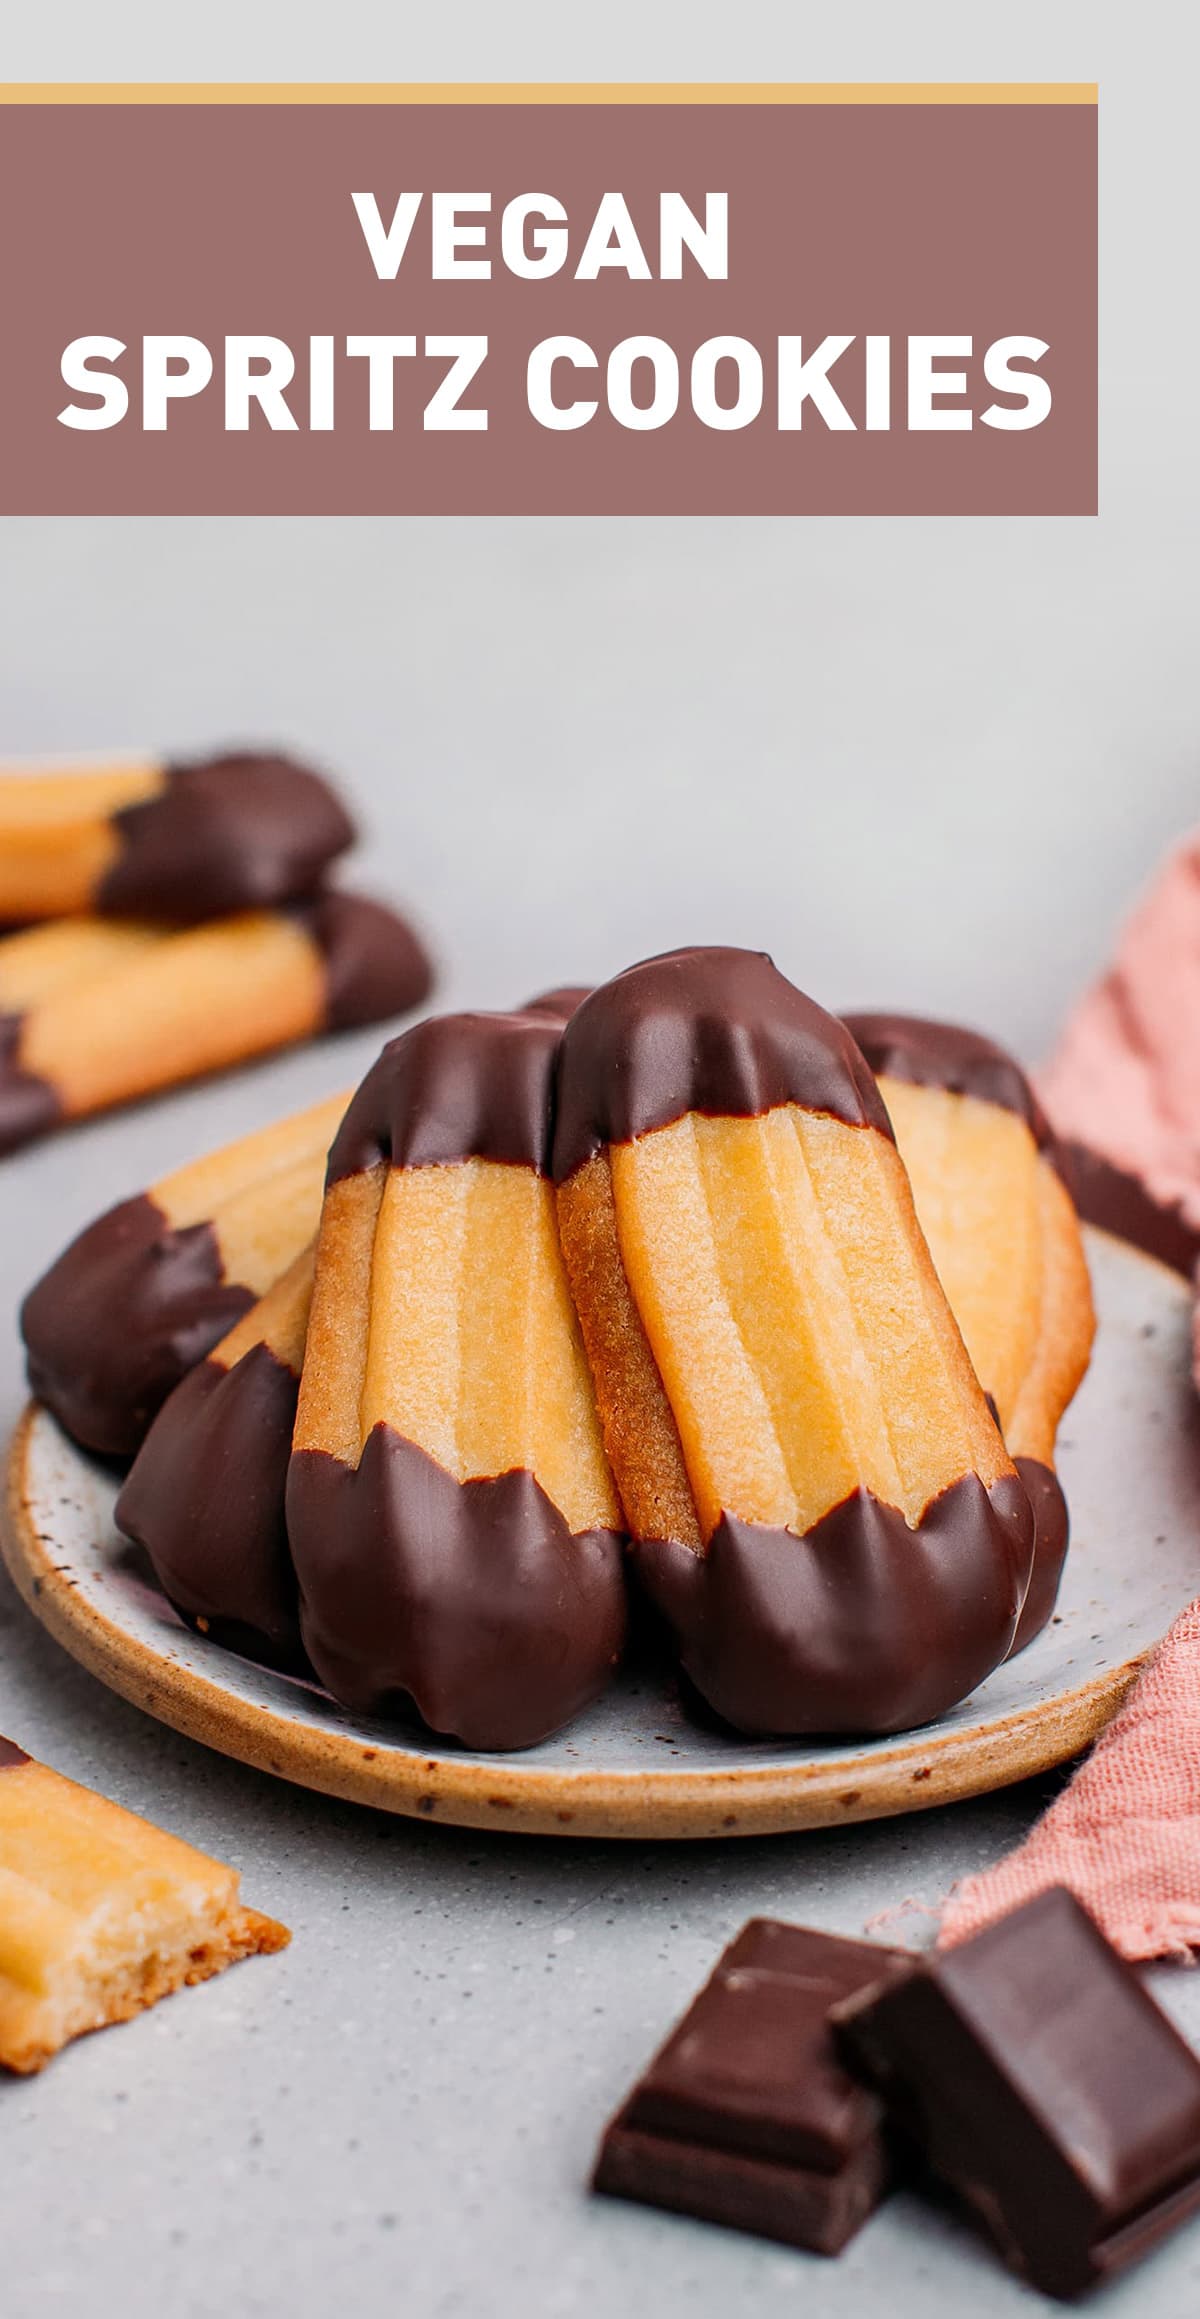 These German-inspired Spritz cookies are delightfully crispy, buttery, and dipped in dark chocolate. Whether you plan on devouring them or gifting them, these vegan cookies are a fun and easy treat that's perfect for the holidays! #holidays #veganbaking #cookies